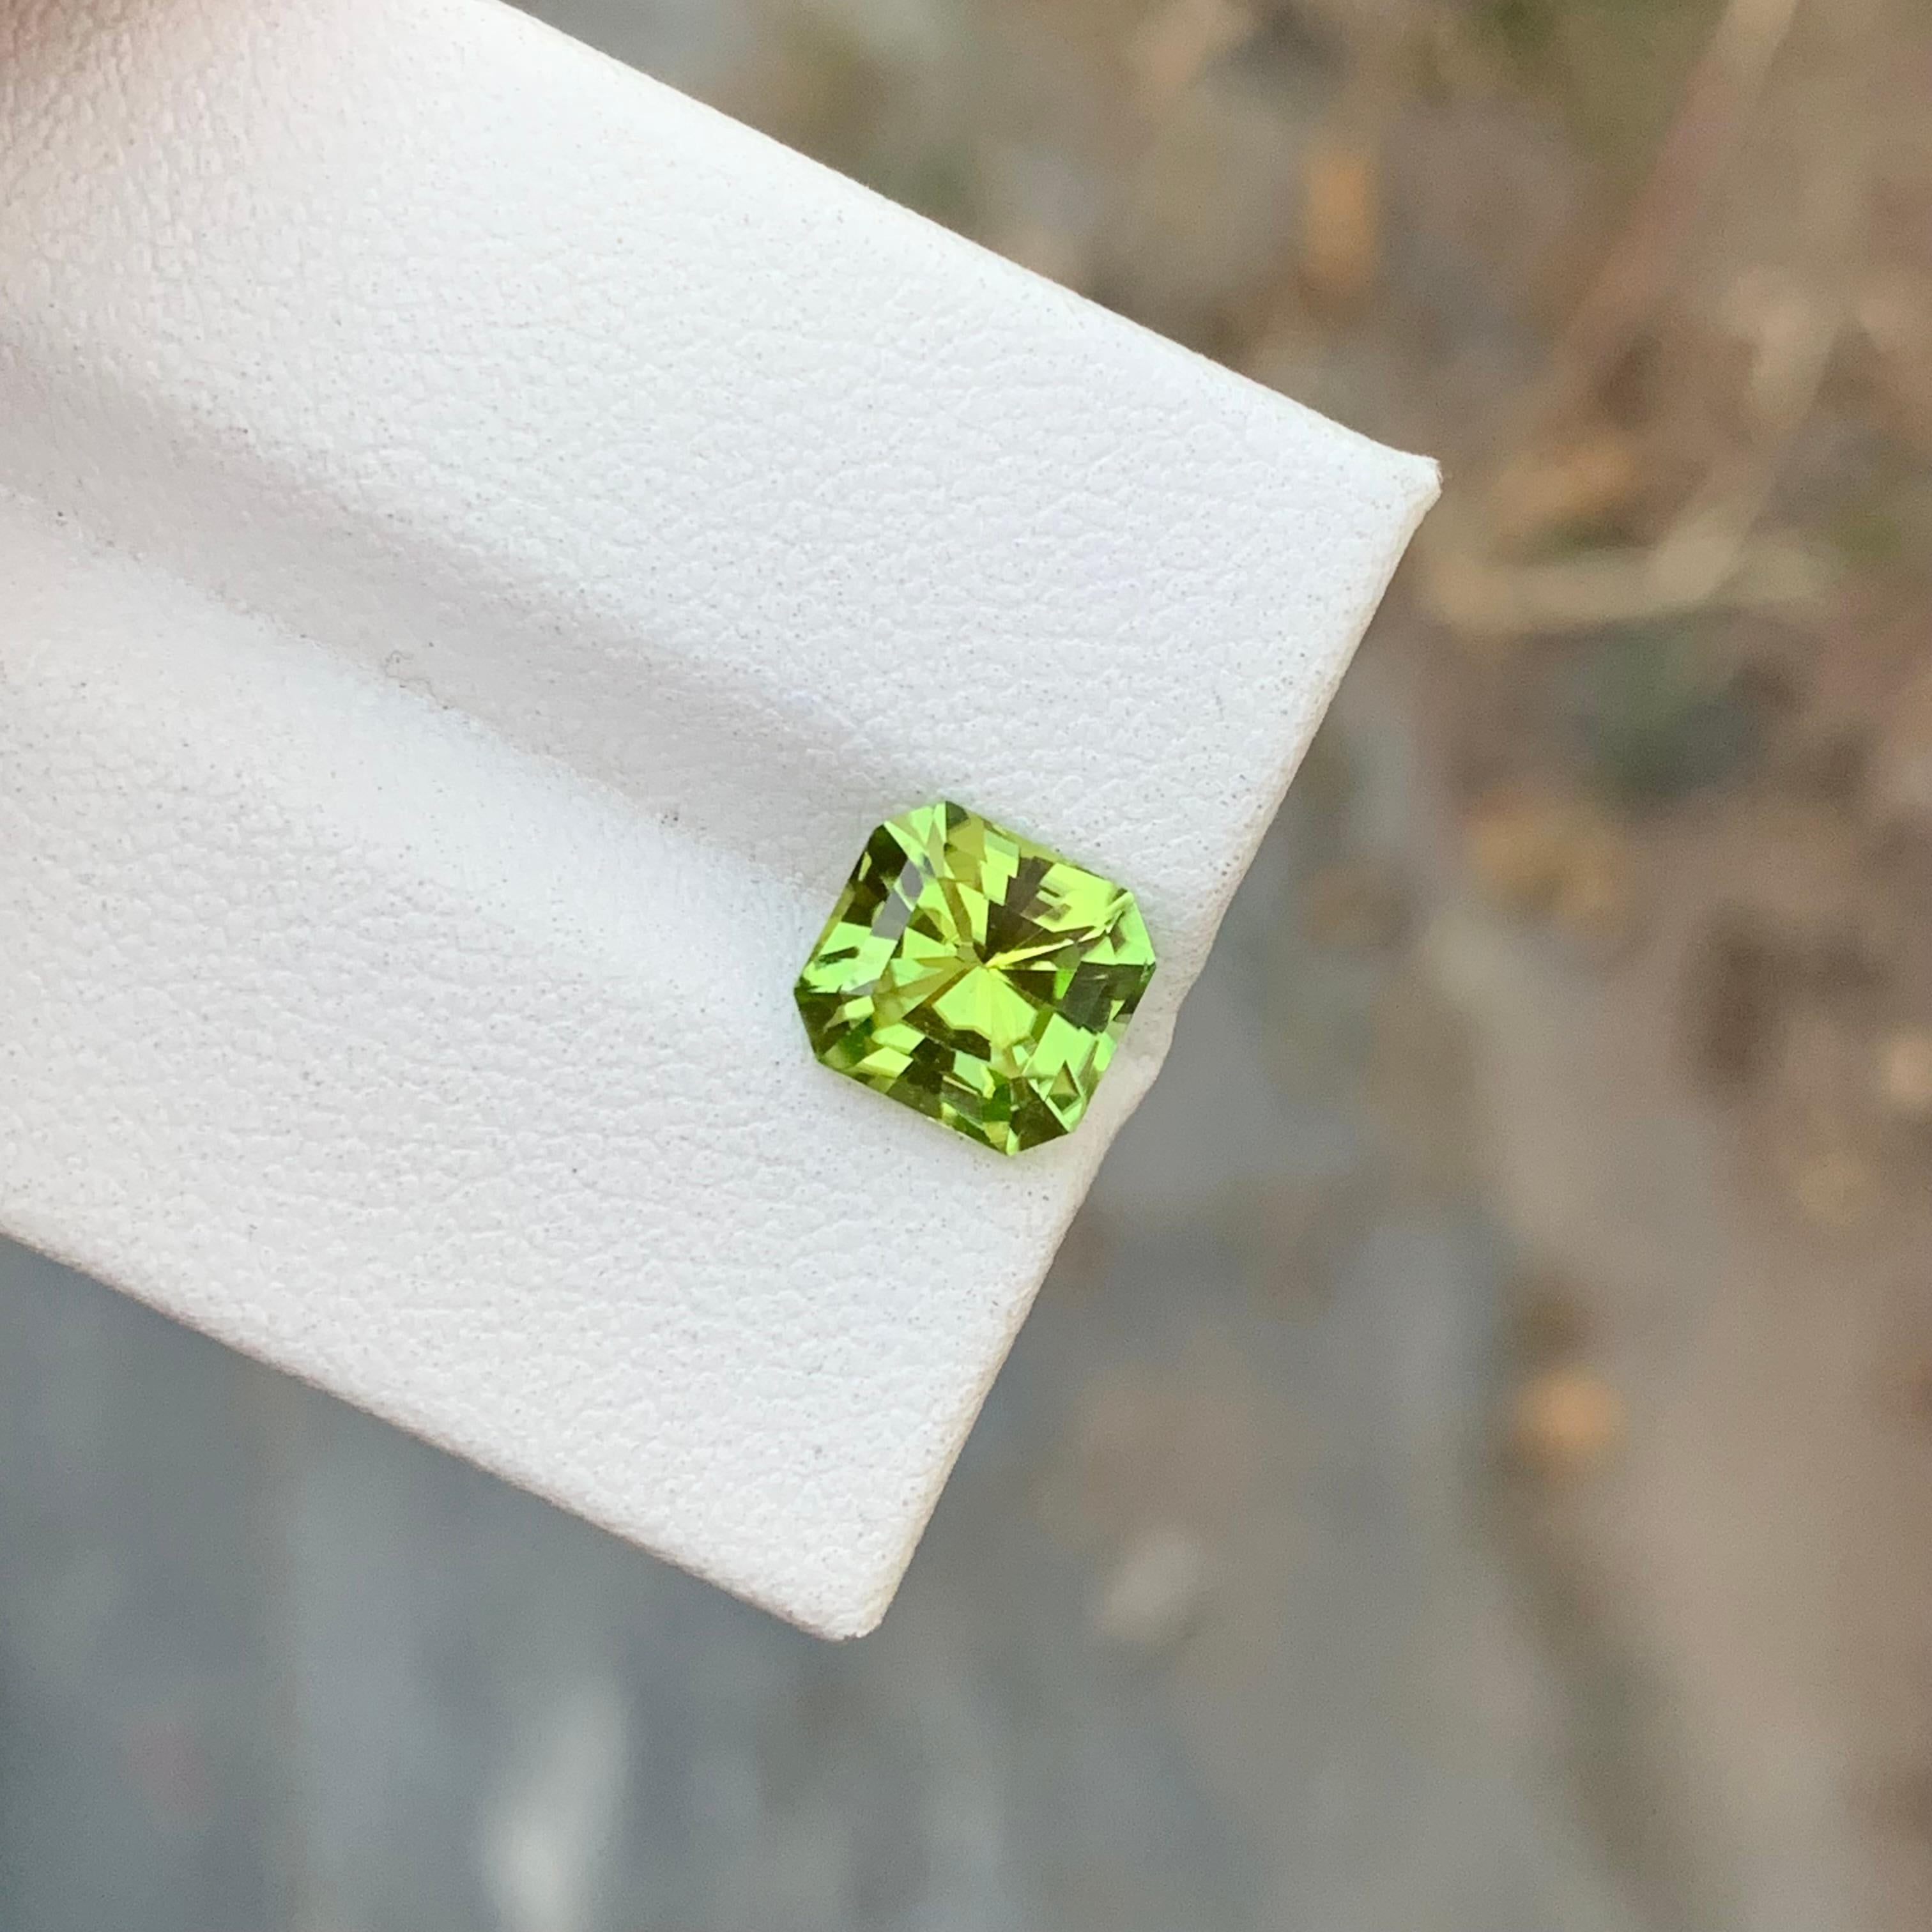 2.10 Carat Natural Loose Peridot Emerald Shape Gem From Earth Mine  For Sale 4